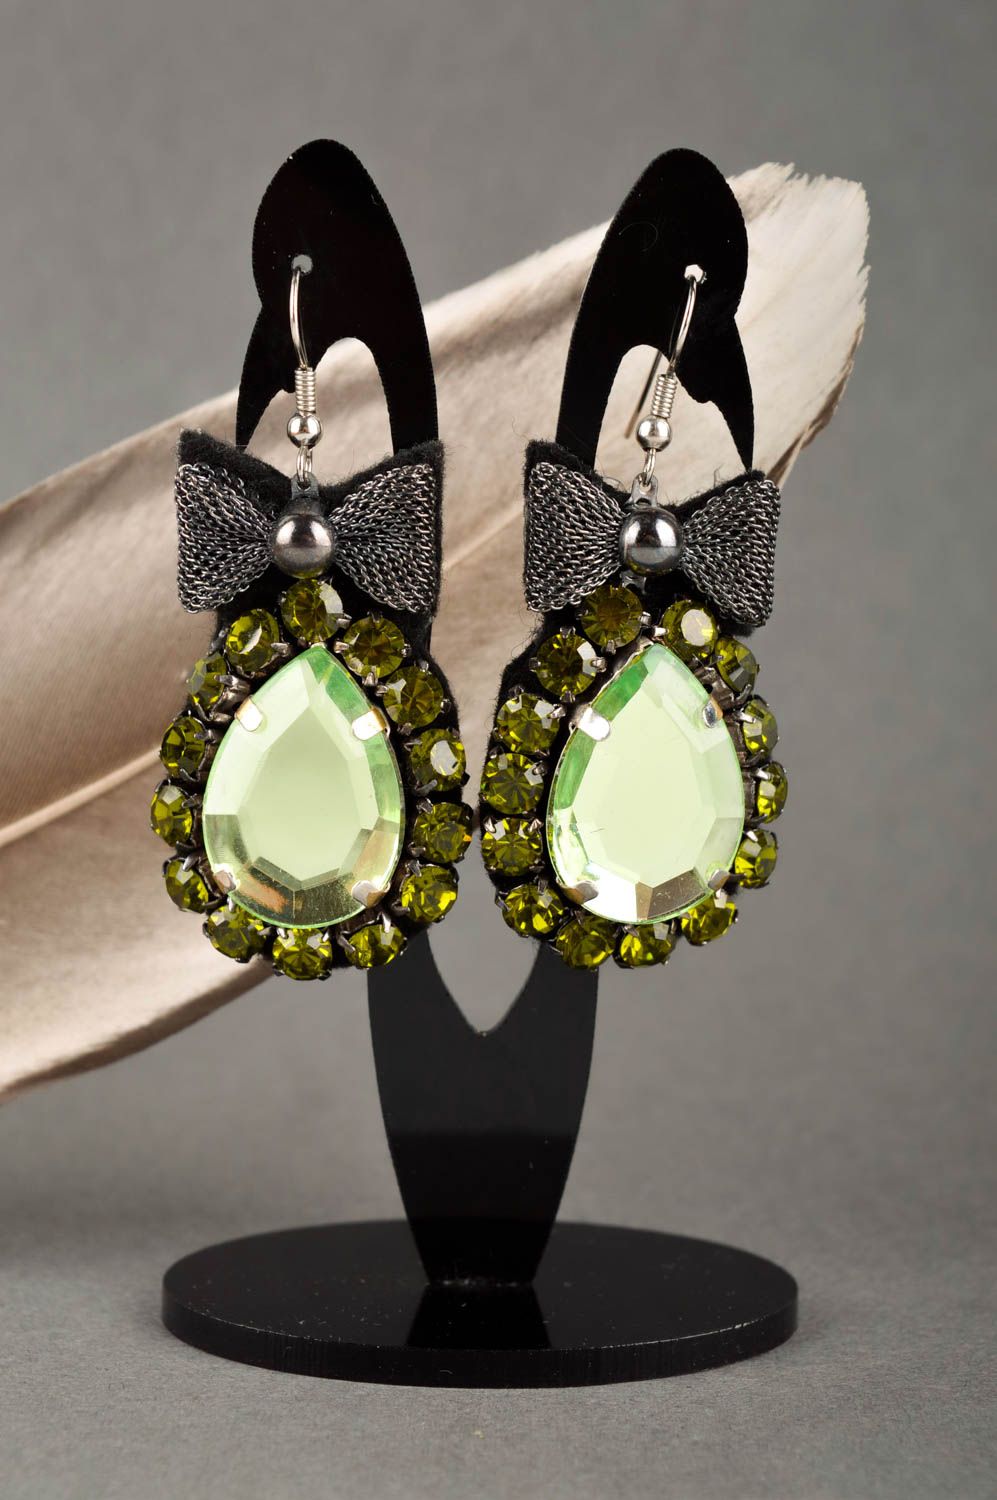 Evening earrings with crystals handmade accessories stylish jewelry for women photo 1